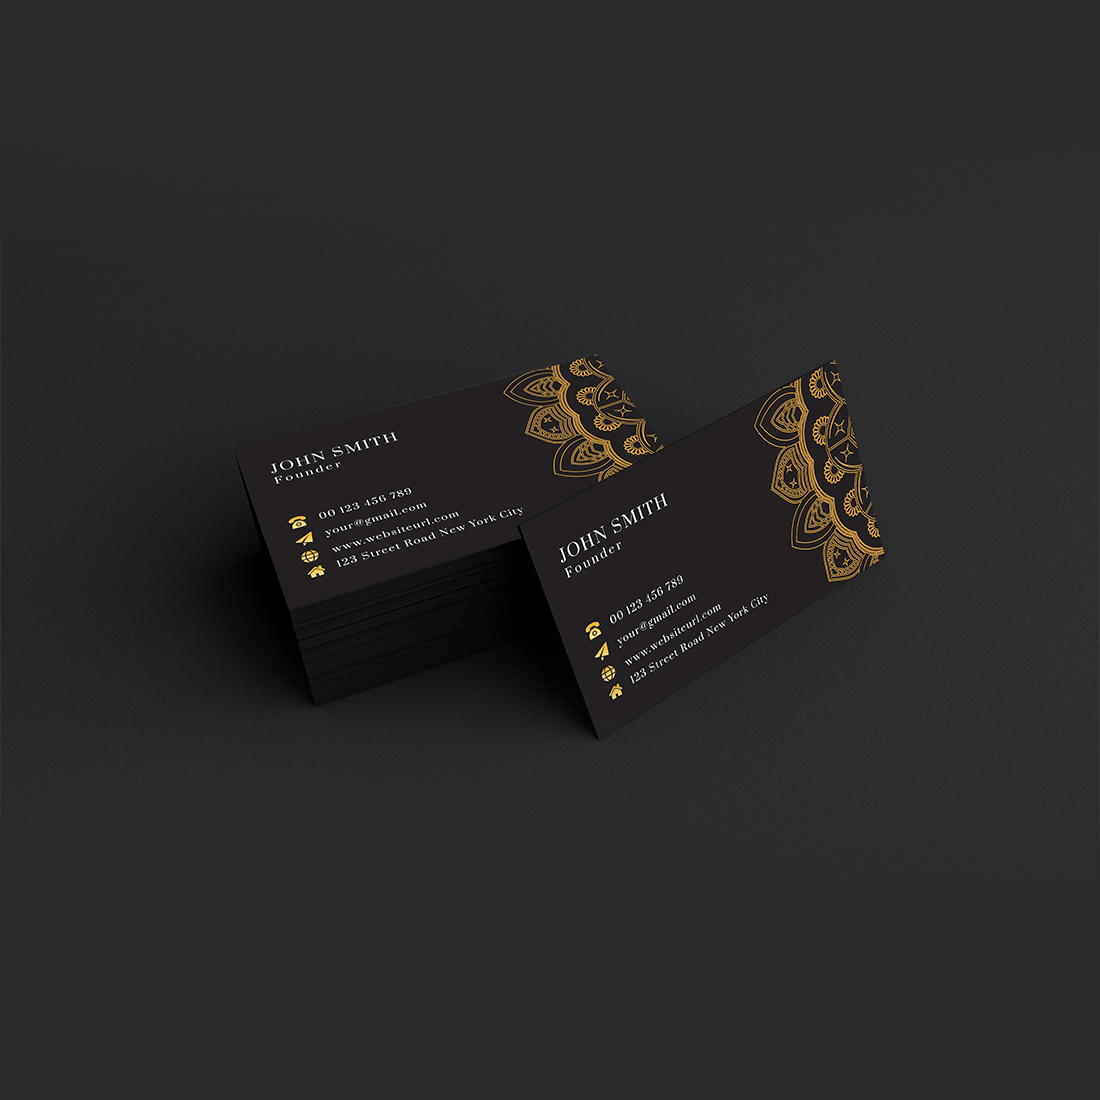 Luxury Business Card And Visiting Card Template Design cover image.